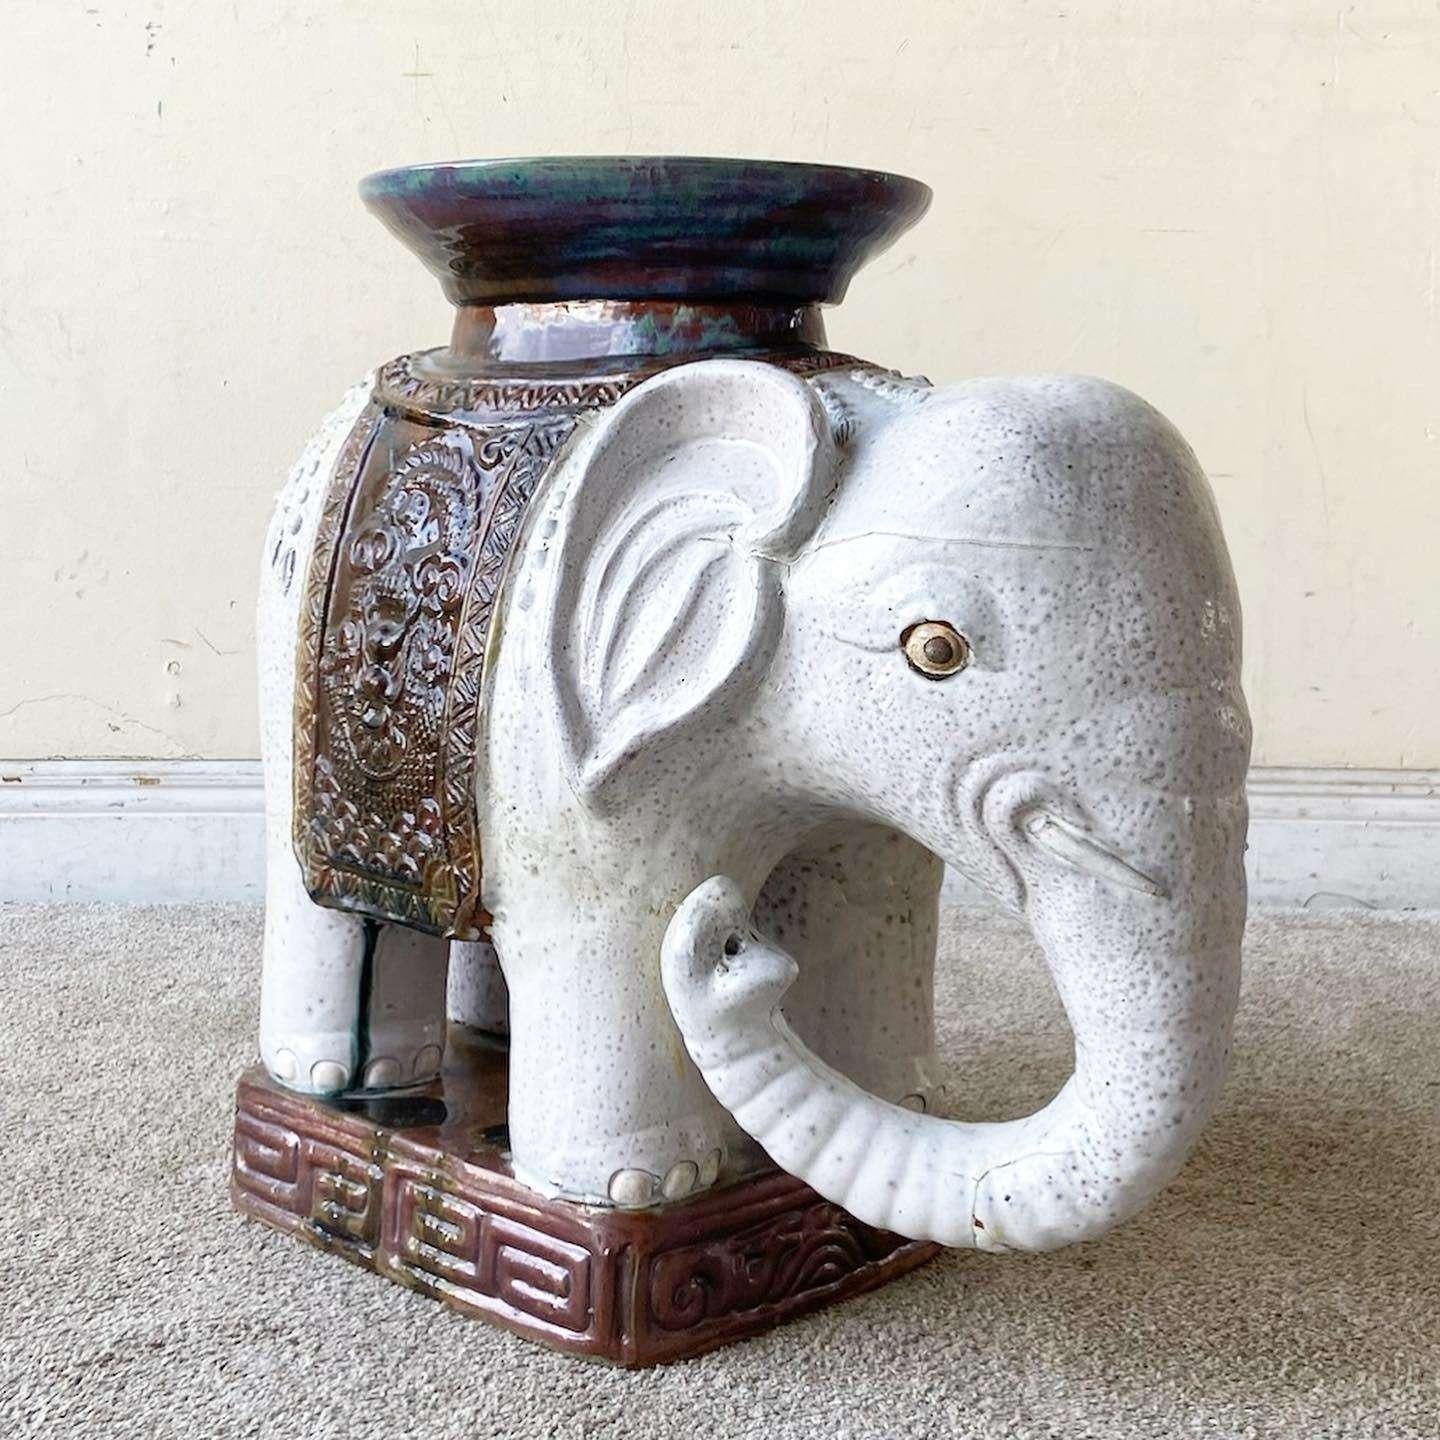 Amazing vintage Asian ceramic elephant side table/sculpture. Features a hand painted finish of gray and brown.